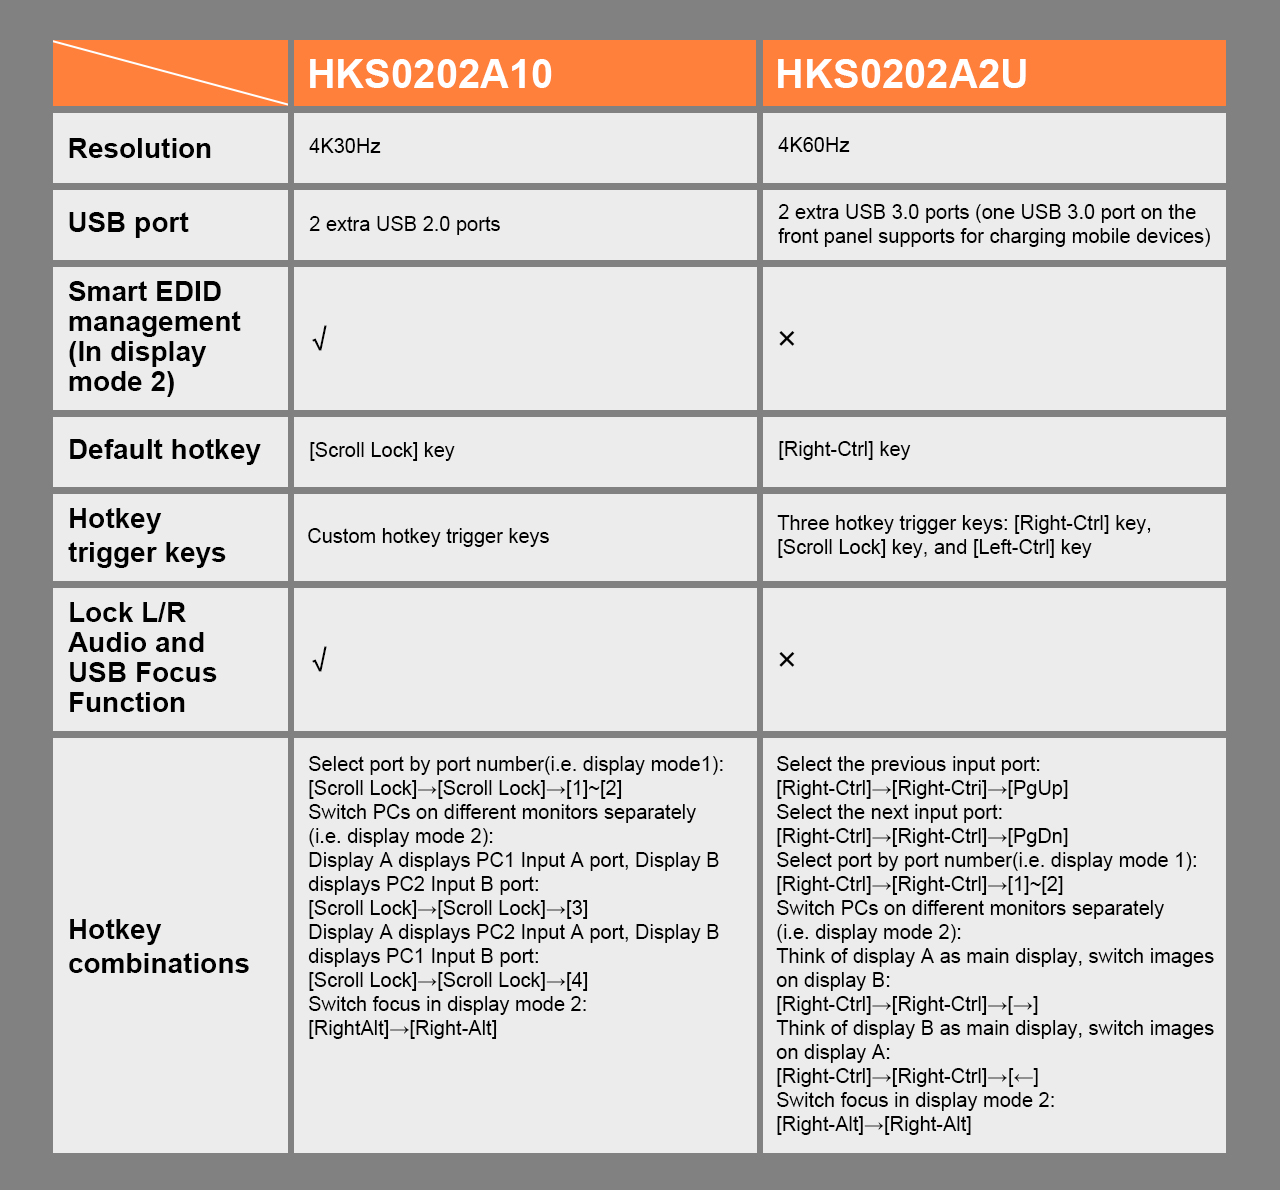 differences between the HKS0202A10 and HKS0202A2U.jpg